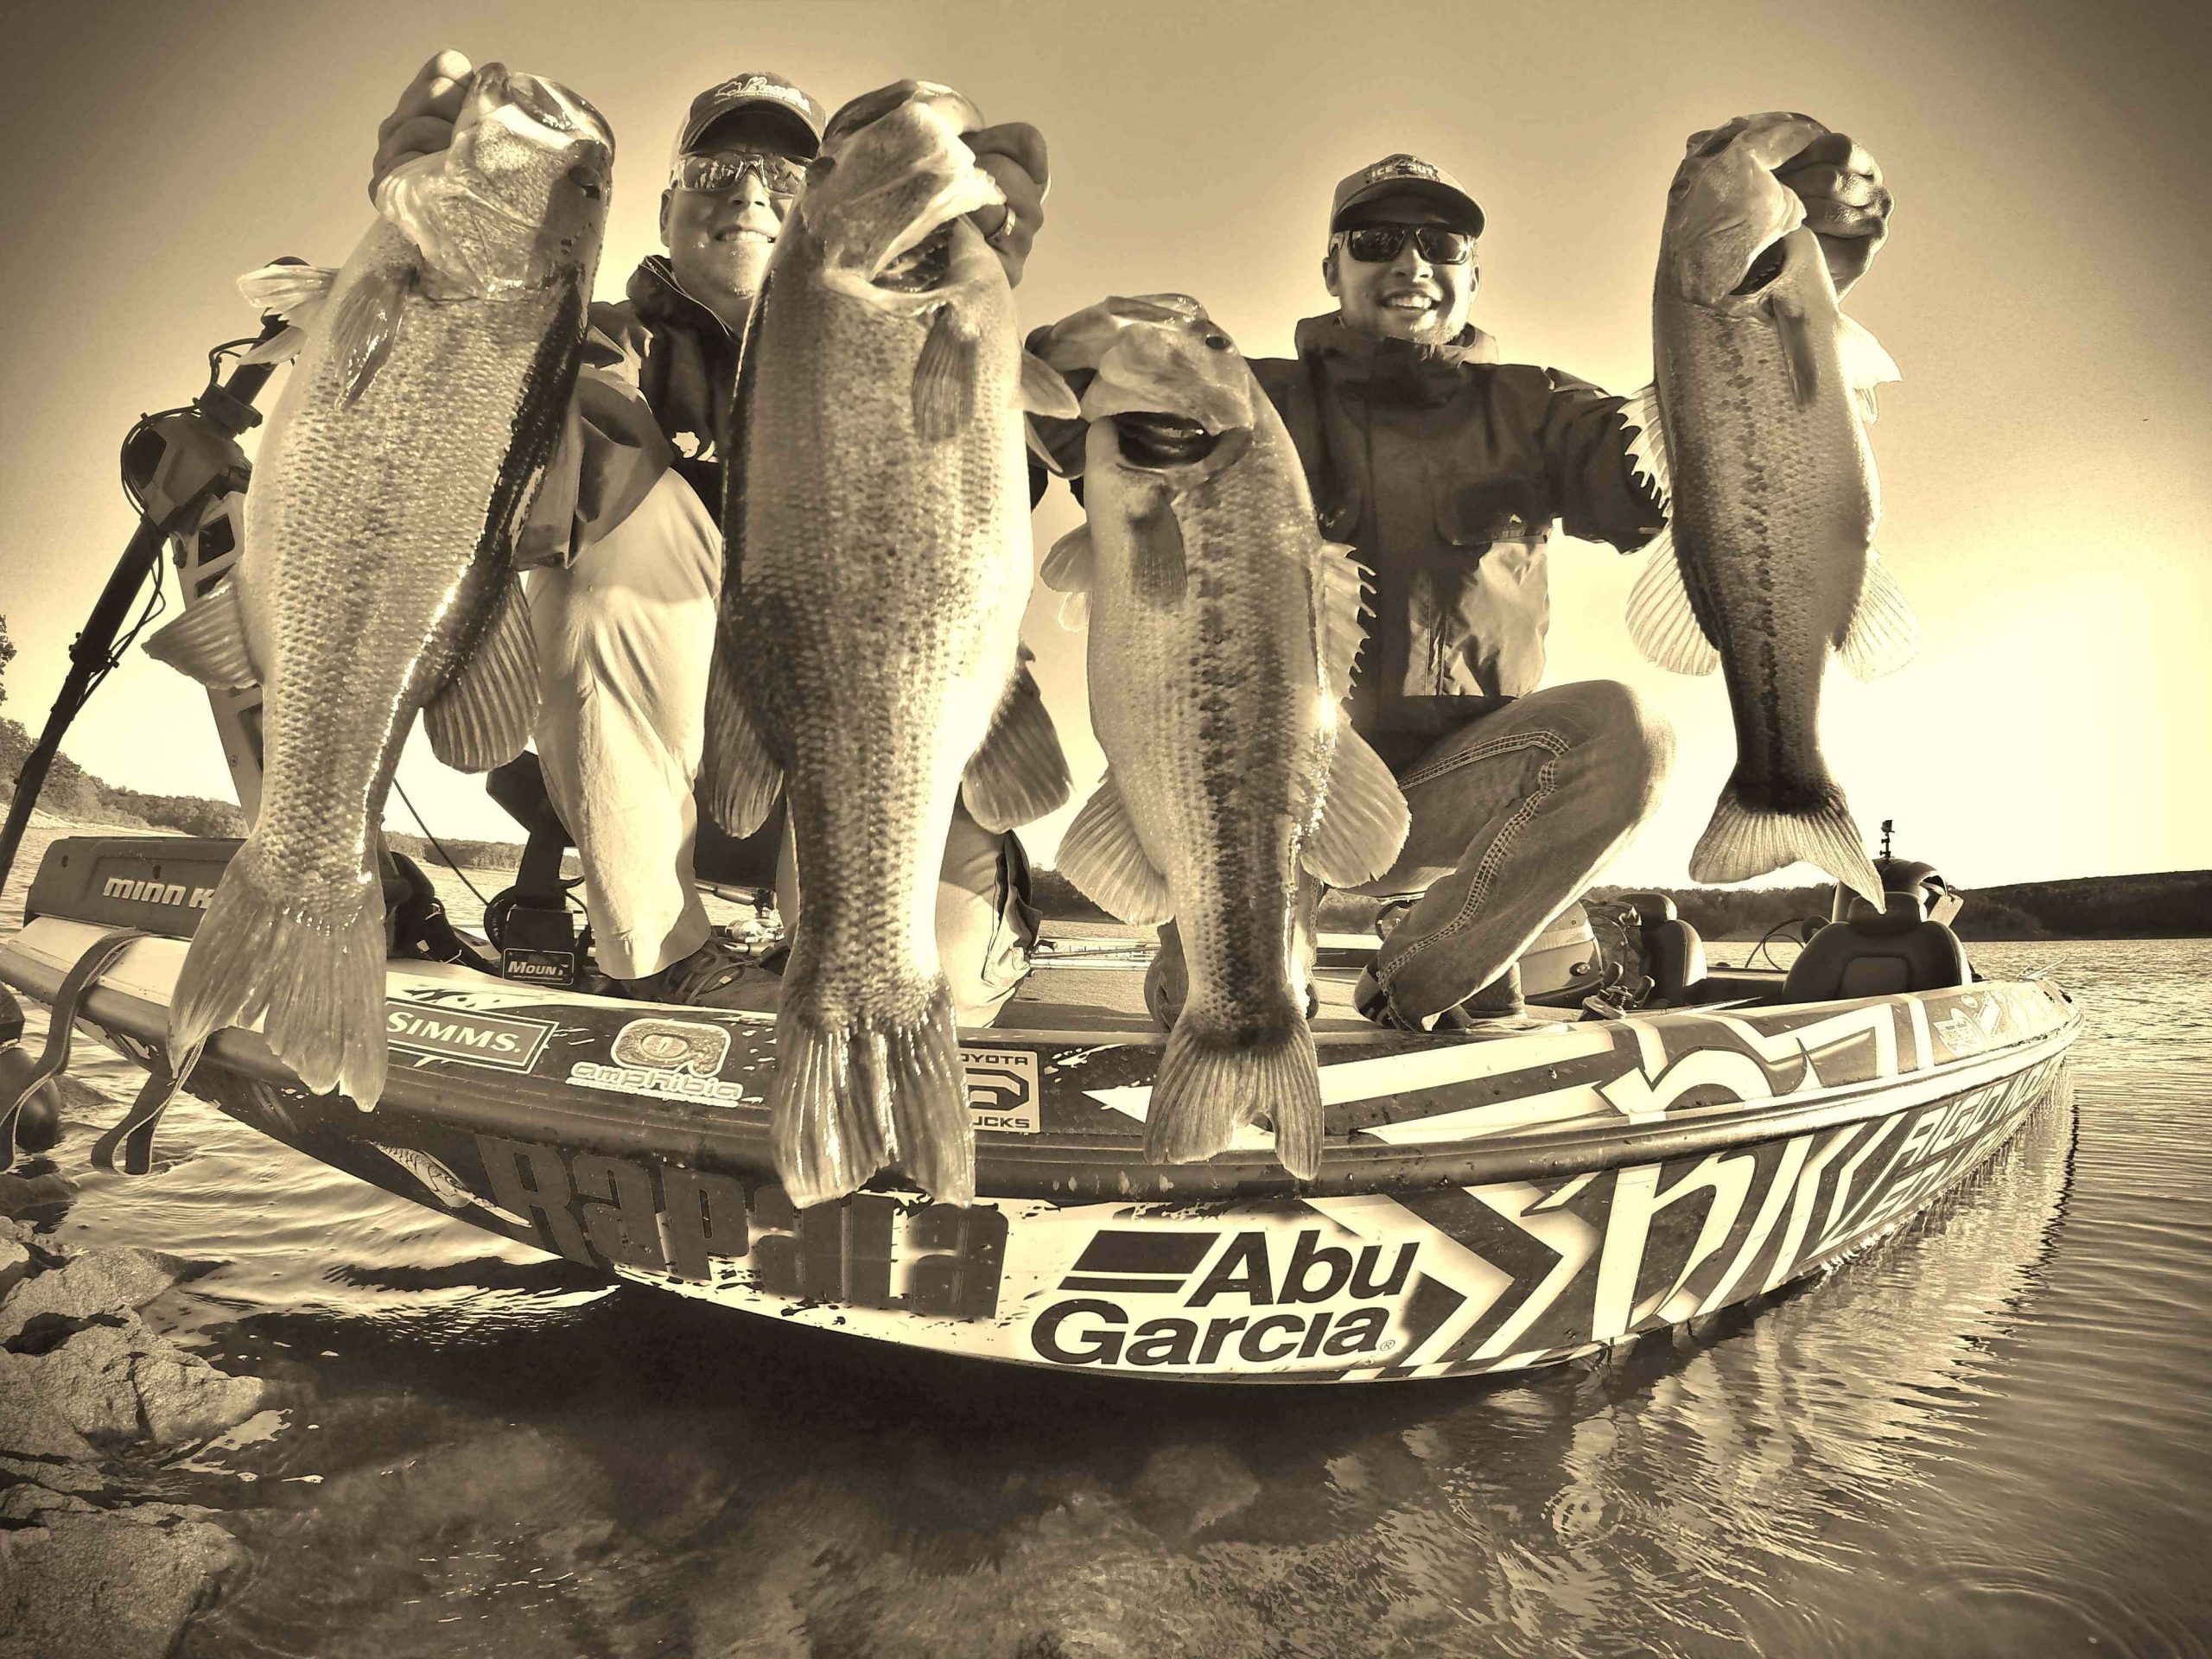 Palaniuk and Kevin LeDoux display their four biggest bass after a day on Lake Arbuckle near LeDoux's hometown of Choctaw, Okla. Palaniuk once again demonstrated his creativity with a GoPro â choosing a black-and-white version for this shot. 